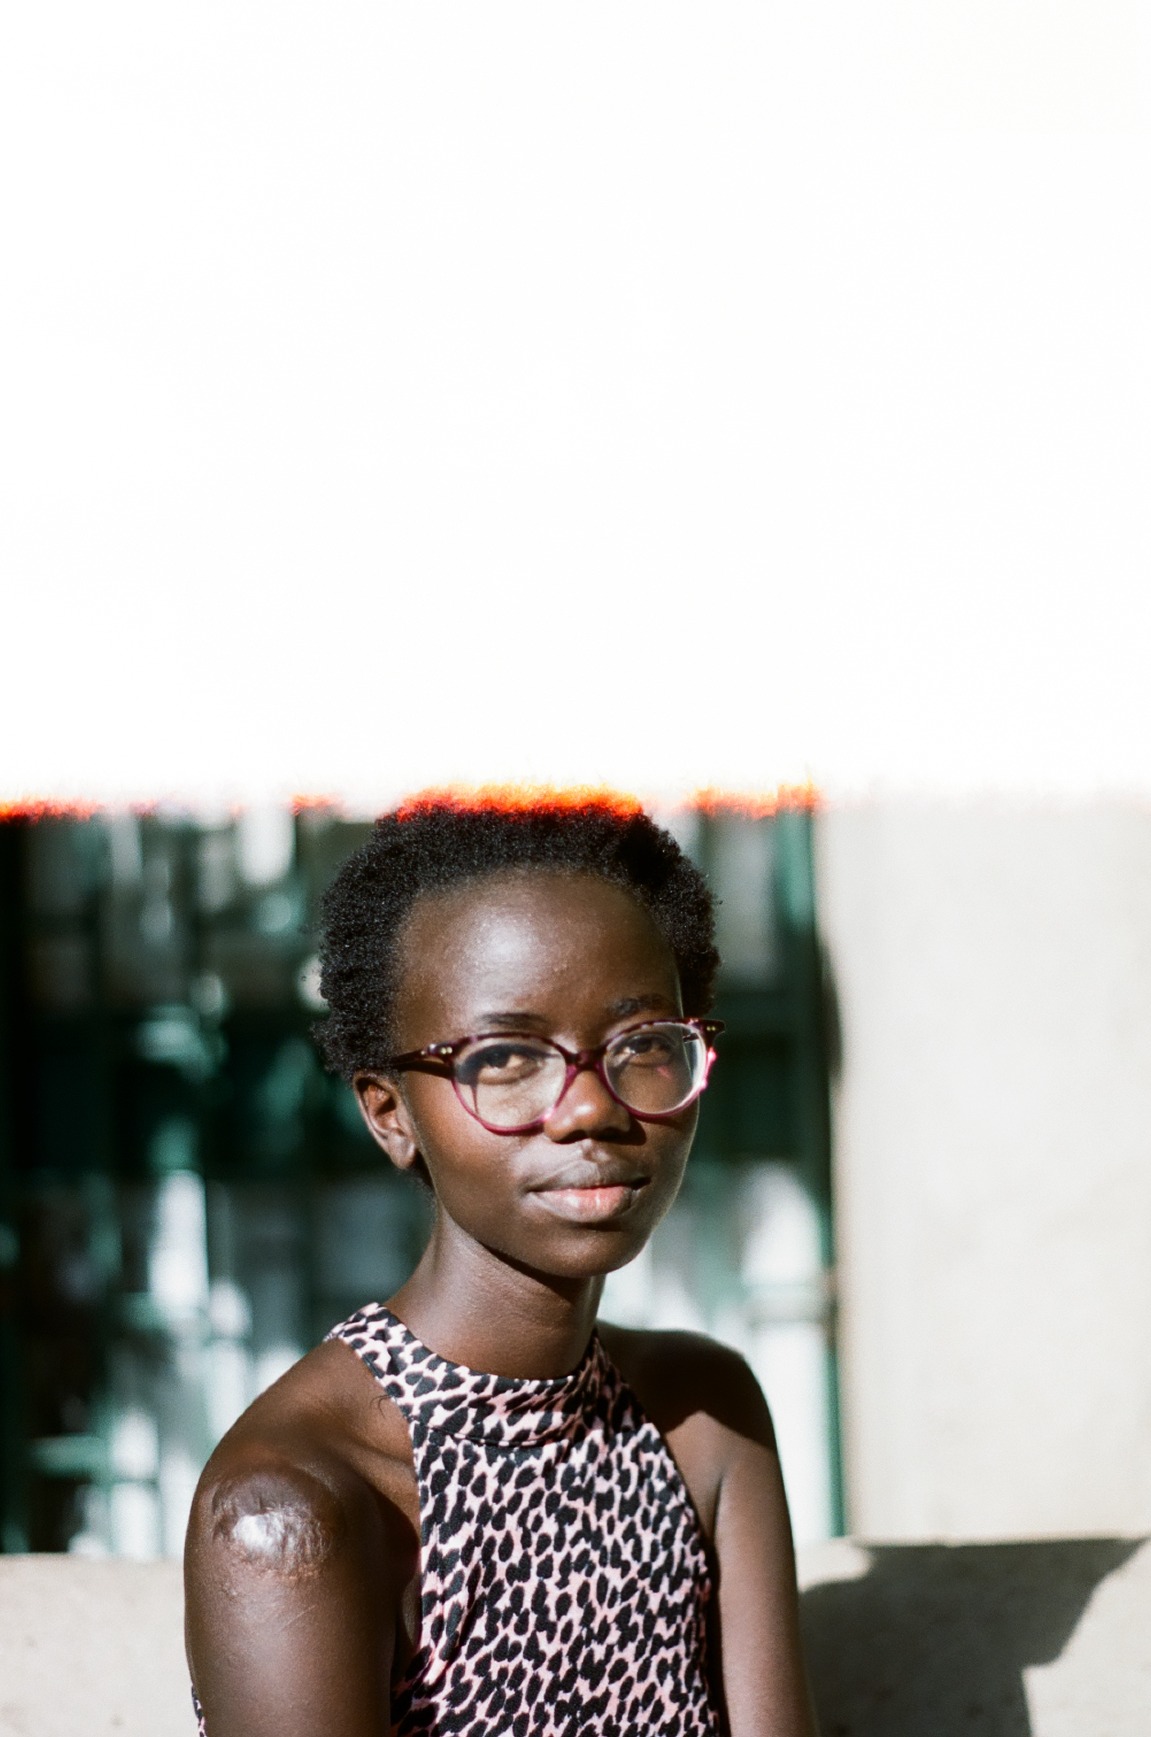 Photo portrait of young African woman wearing glasses and a leopard print top. She has a scar on her shoulder.